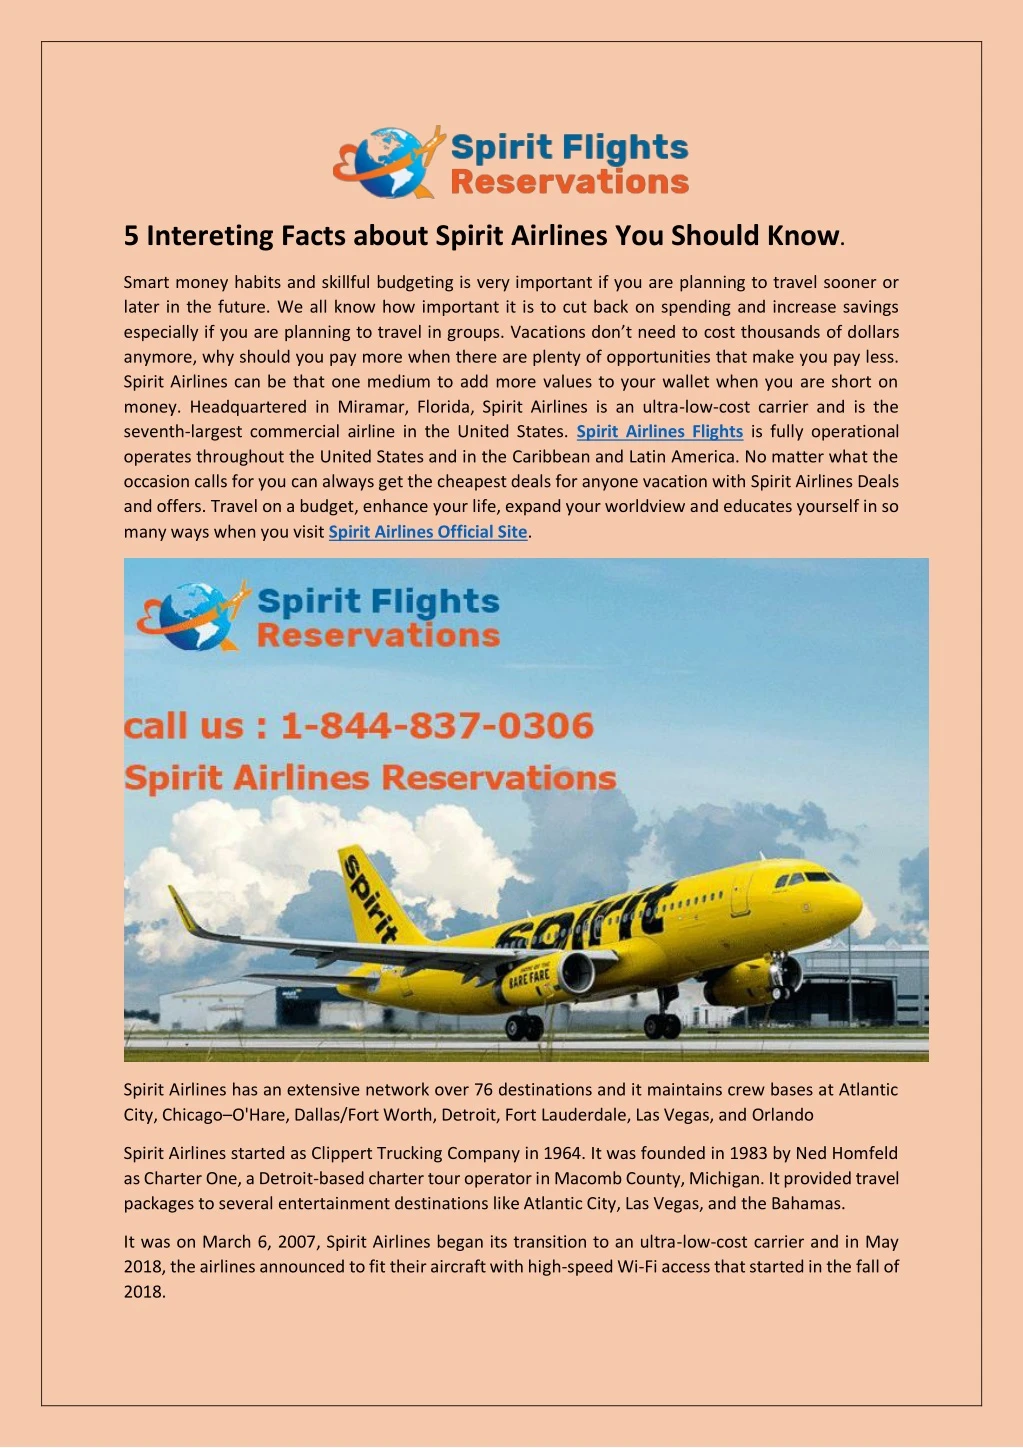 5 intereting facts about spirit airlines